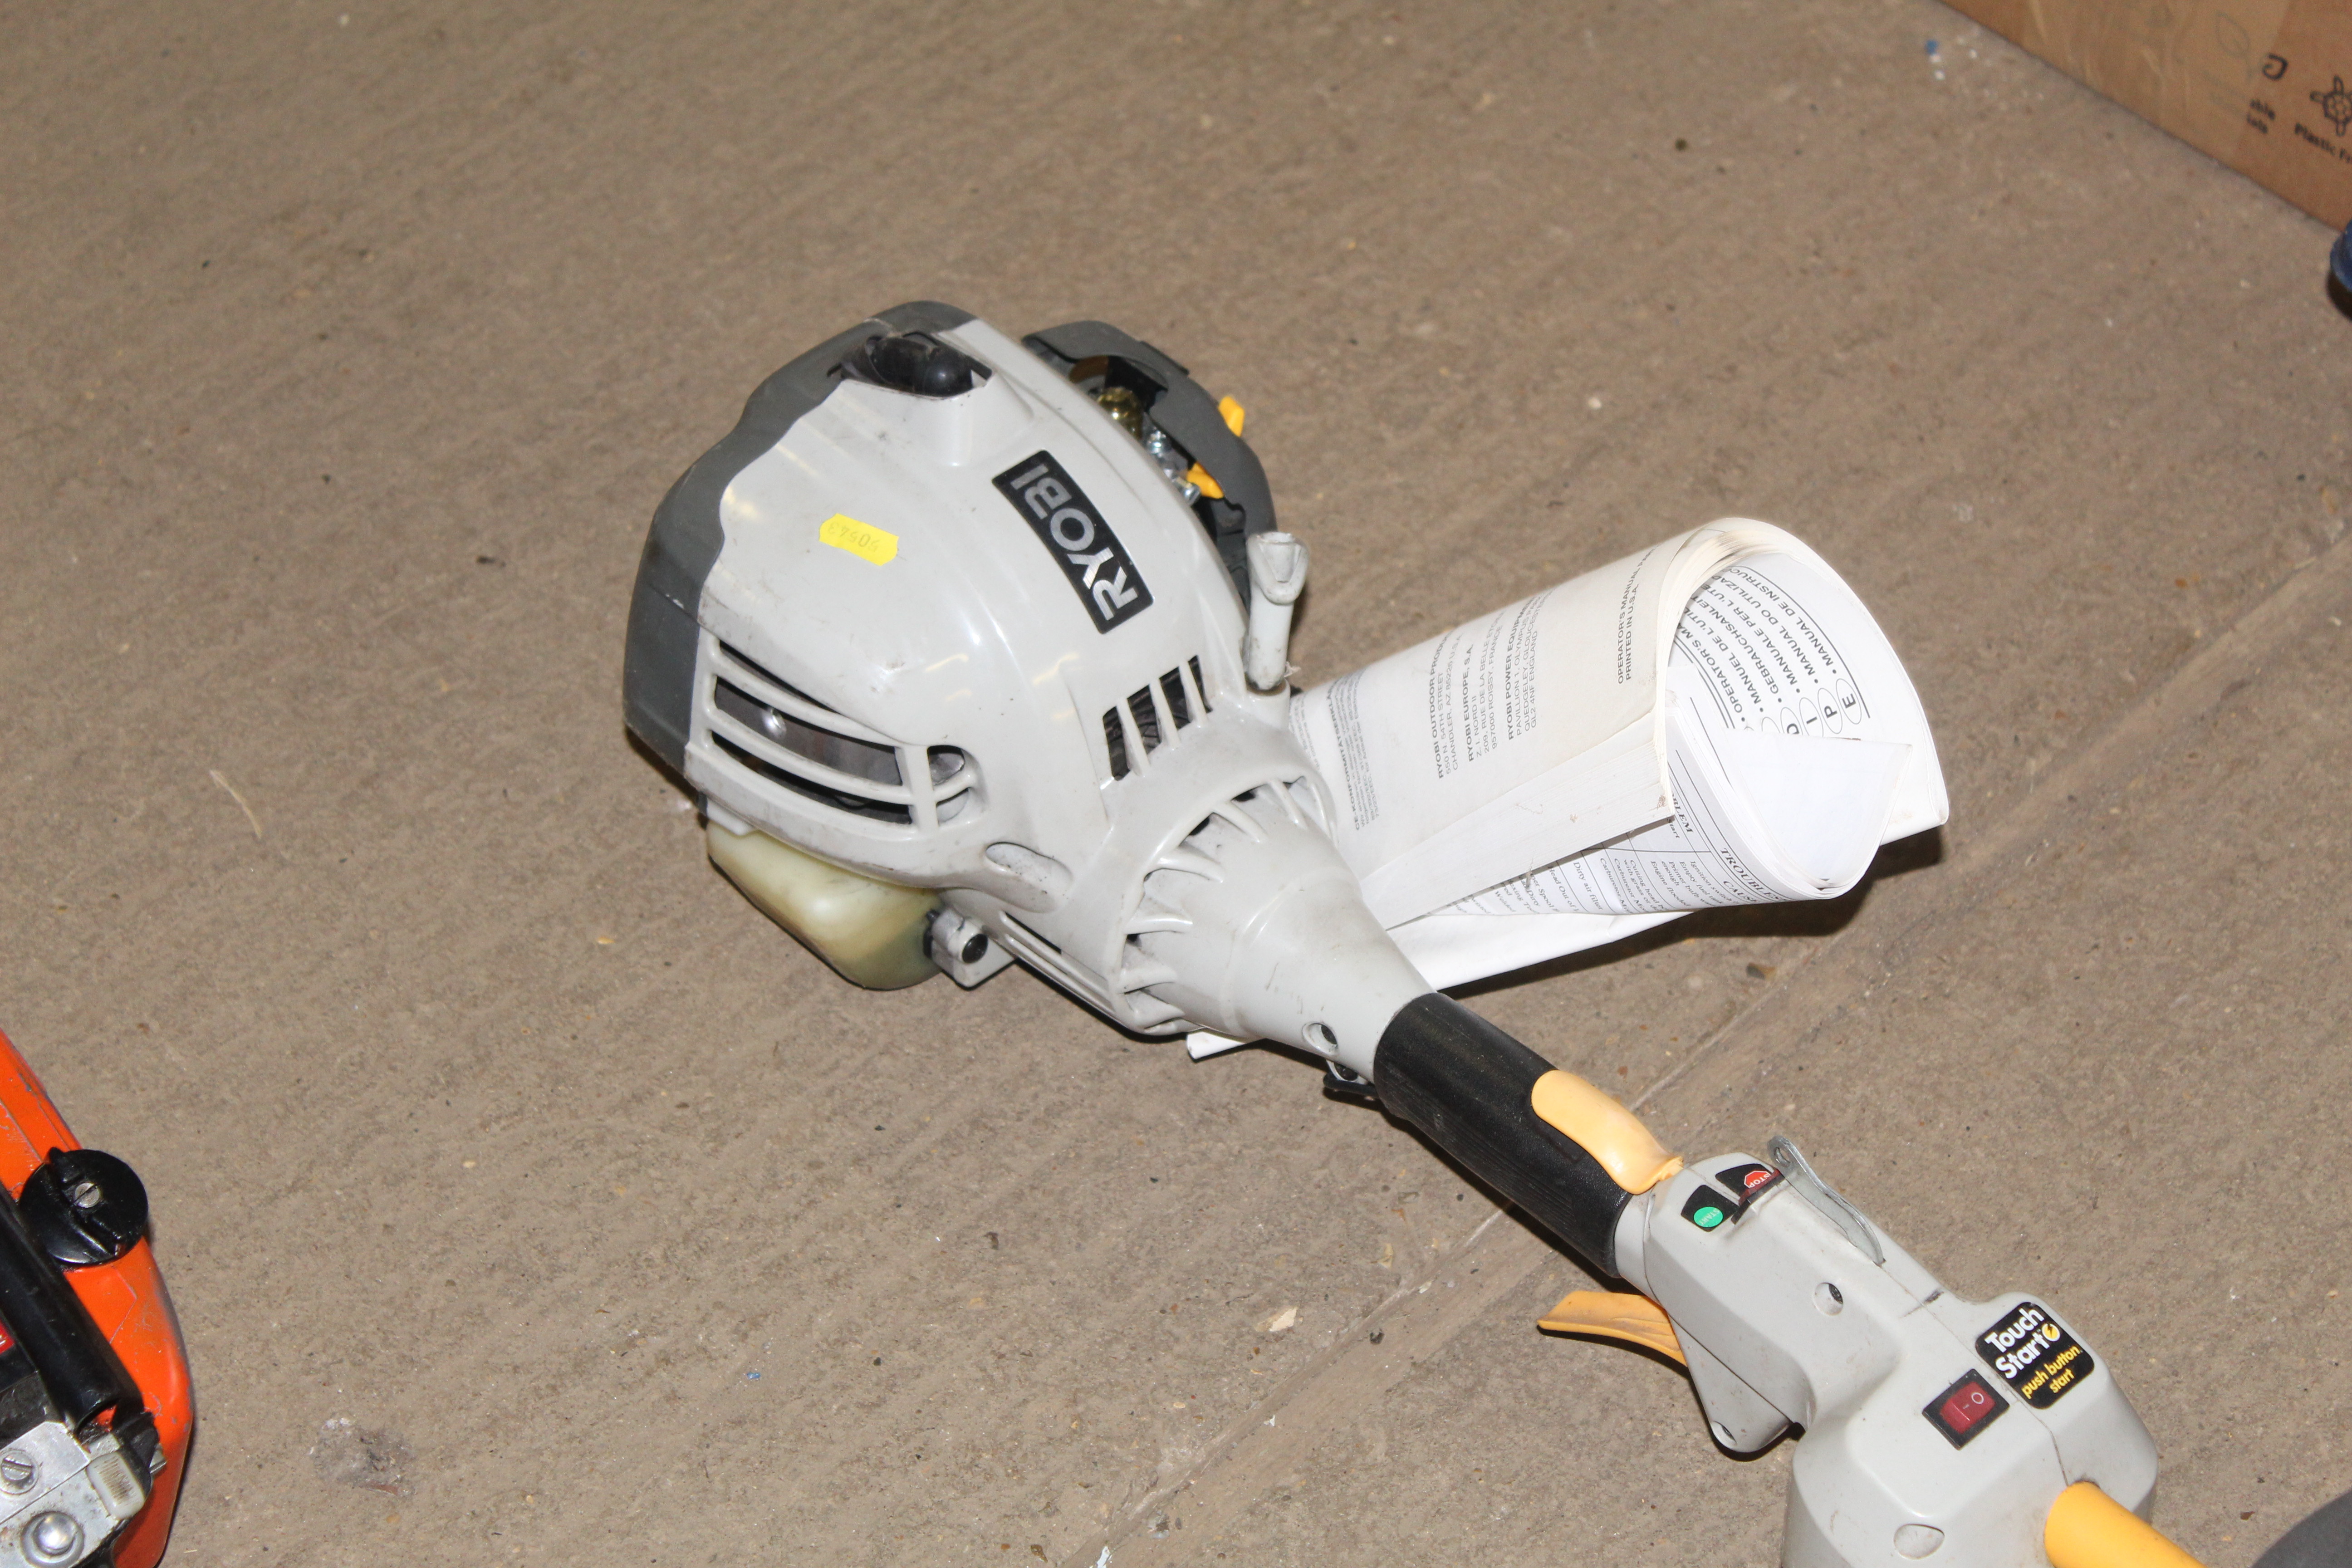 A Ryobi petrol strimmer with instruction guide - Image 2 of 4